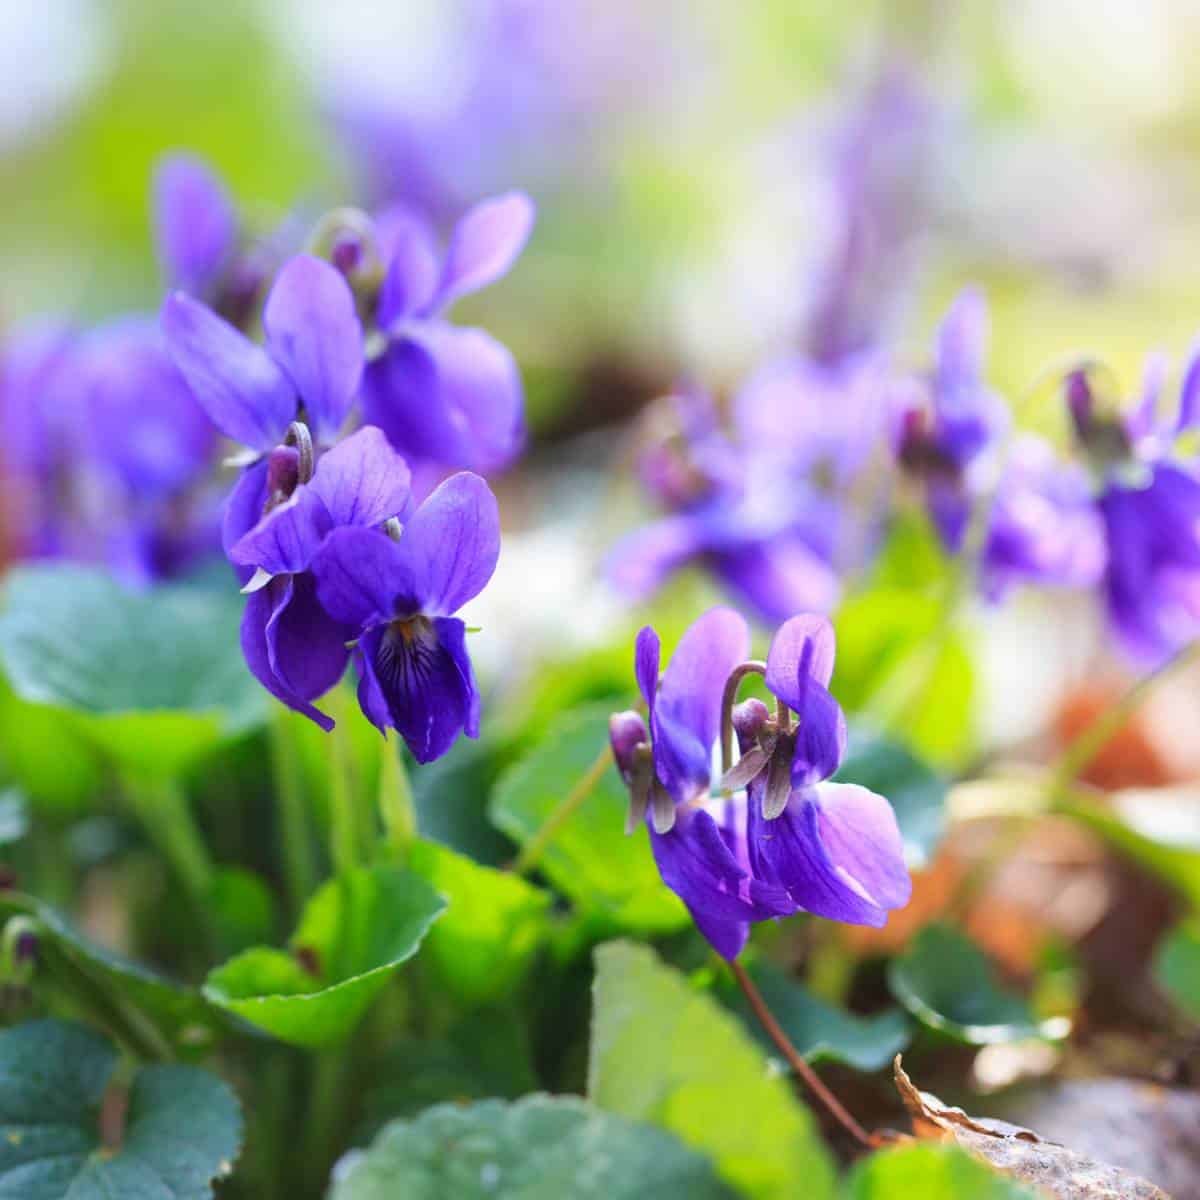 Wild violets blooming in the woods.